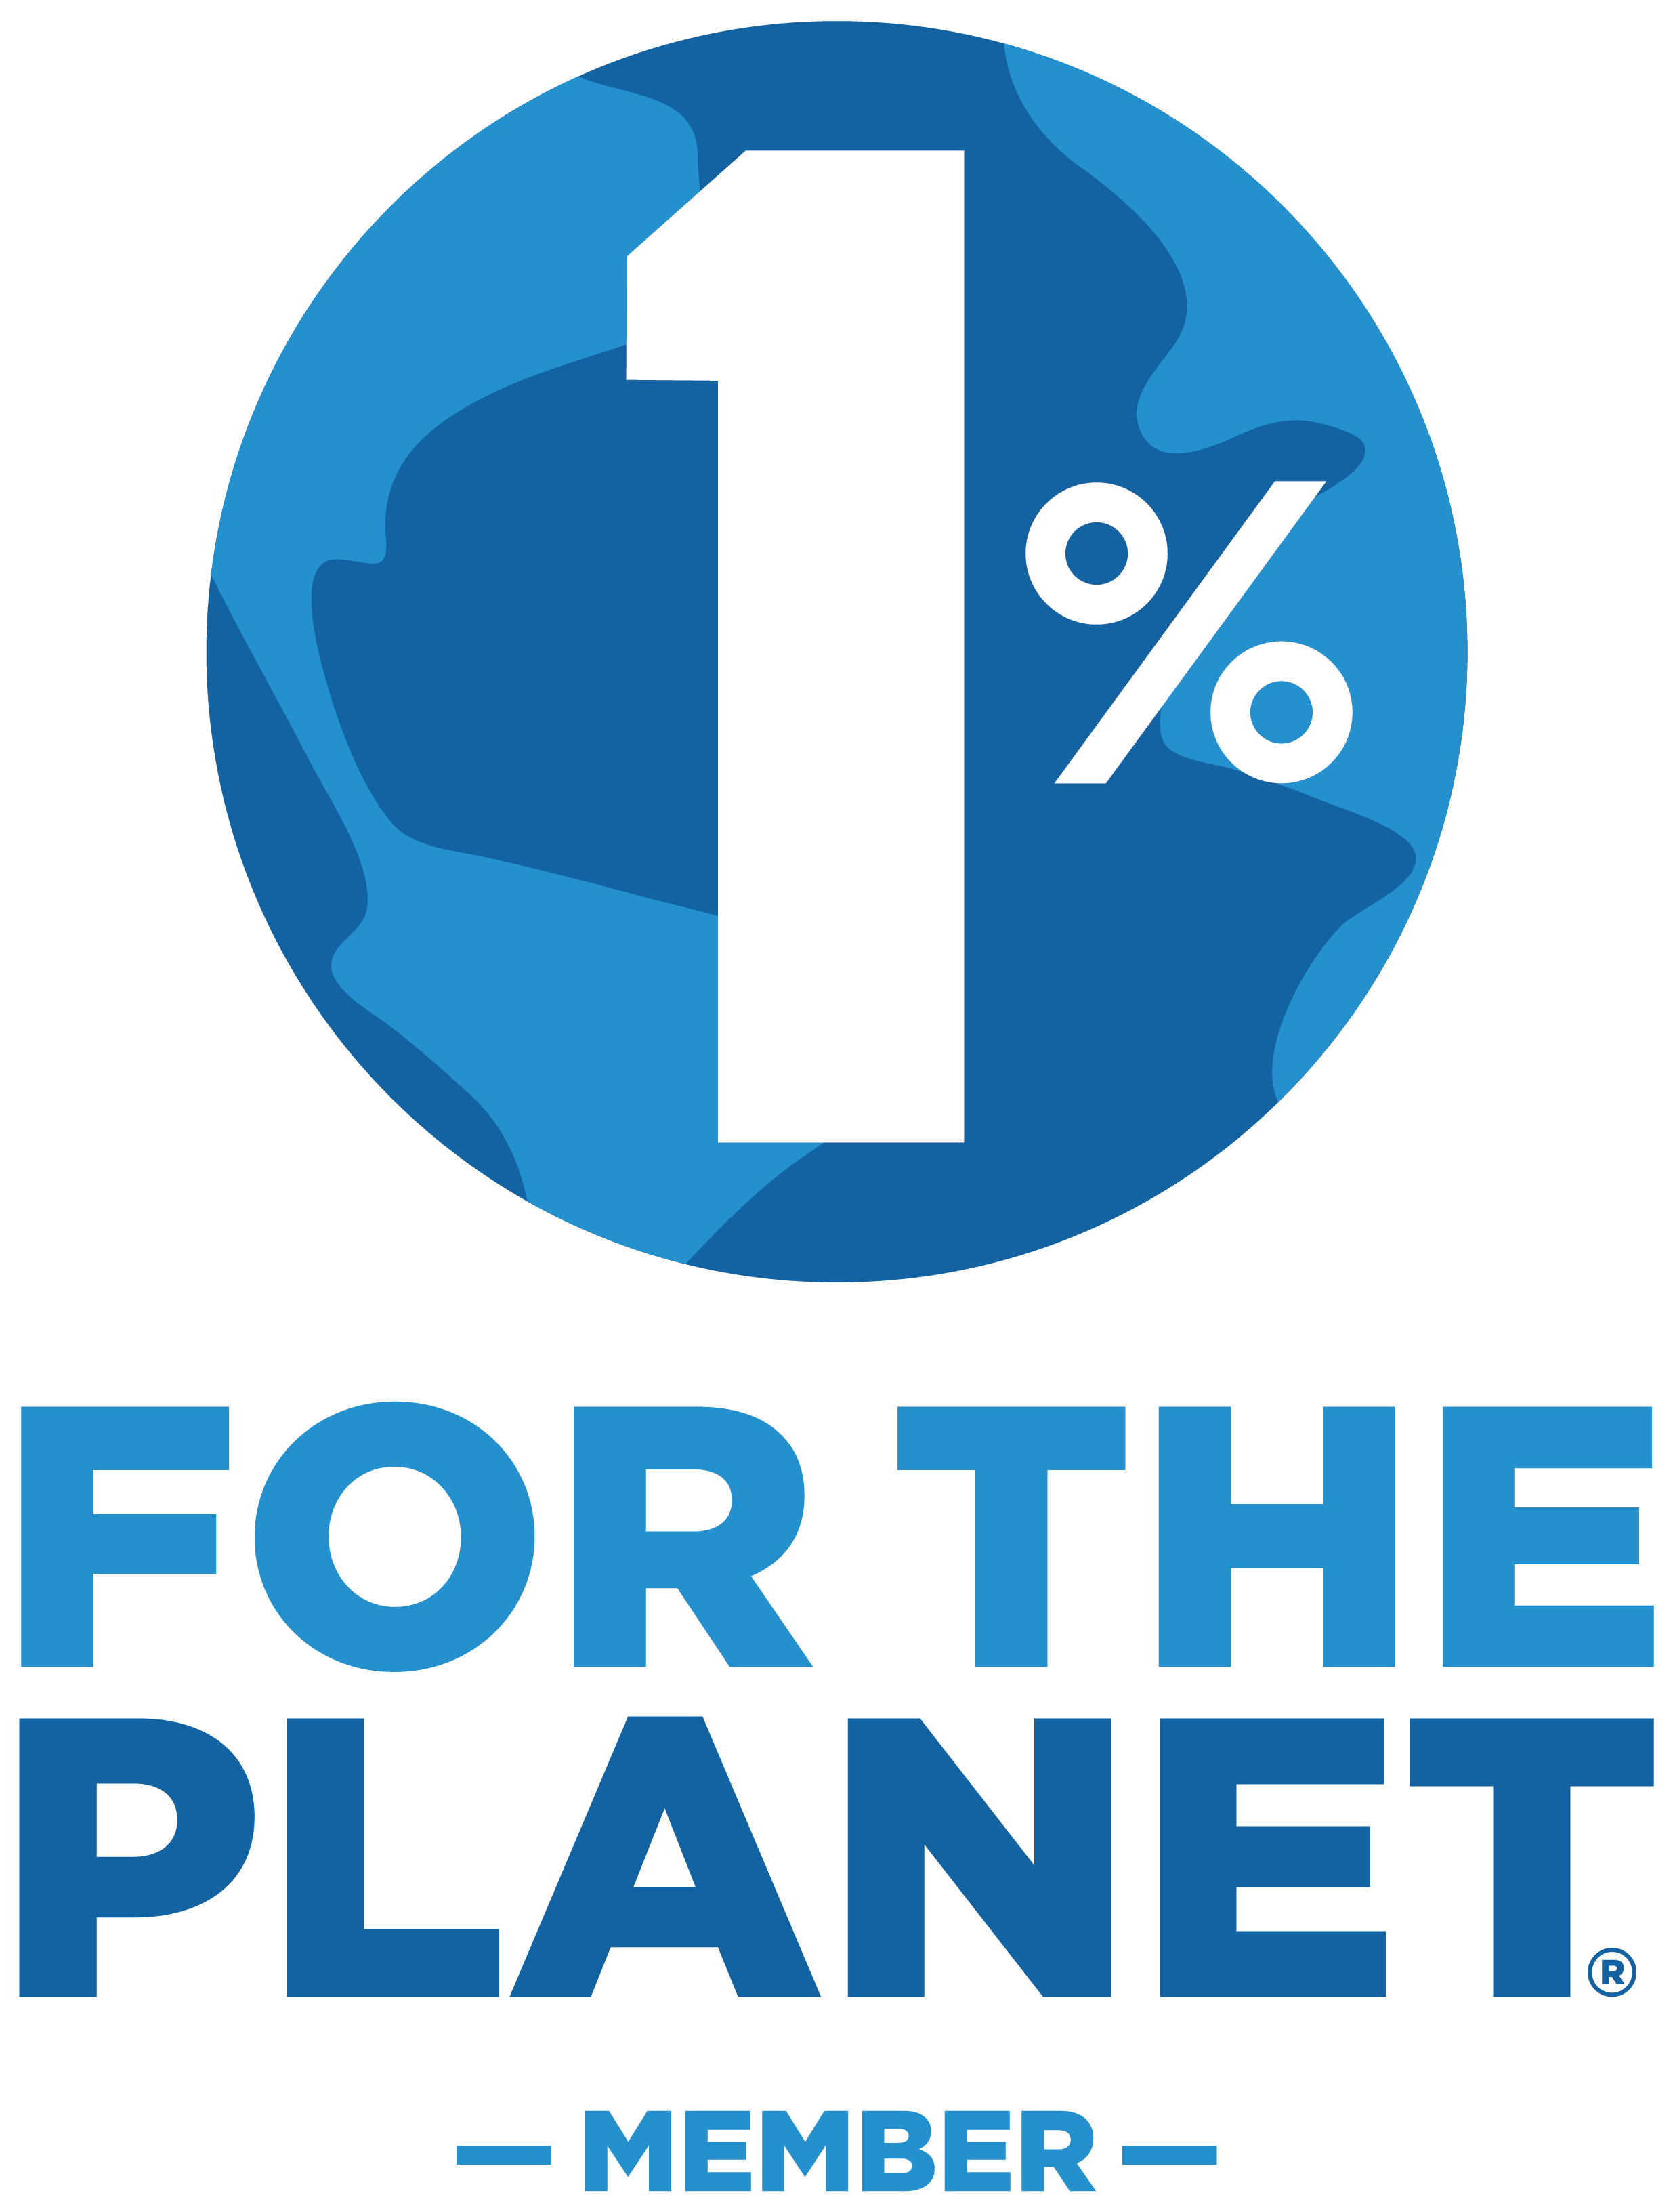 1% For The Planet member badge logo, blue logo with a globe icon under the "1%"